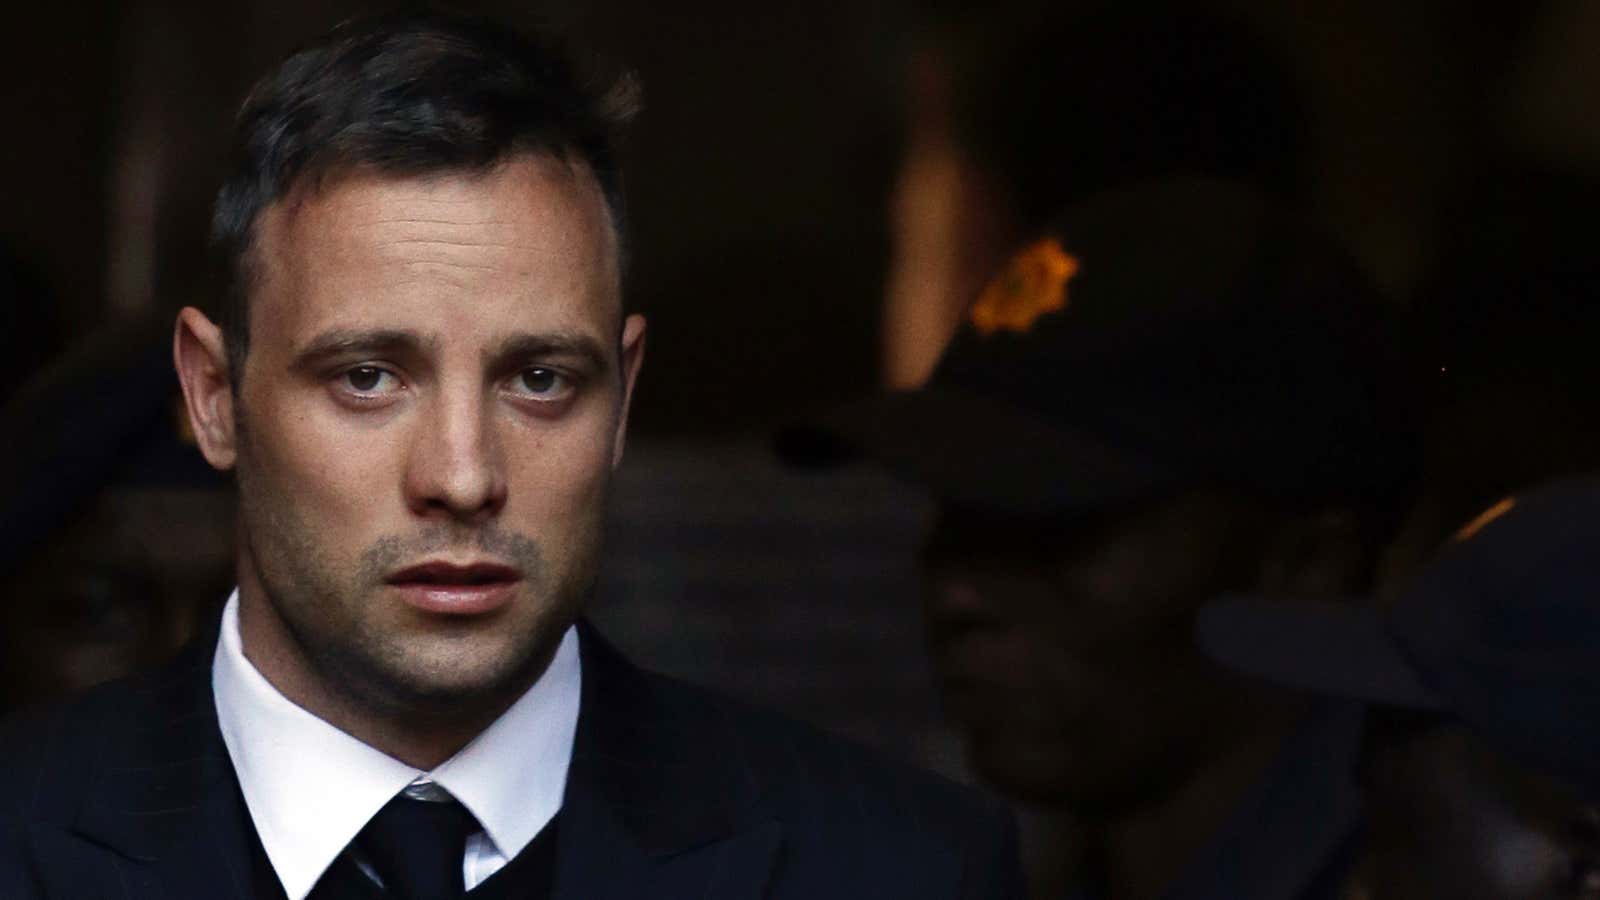 Pistorius will return to prison, this time for a longer sentence.